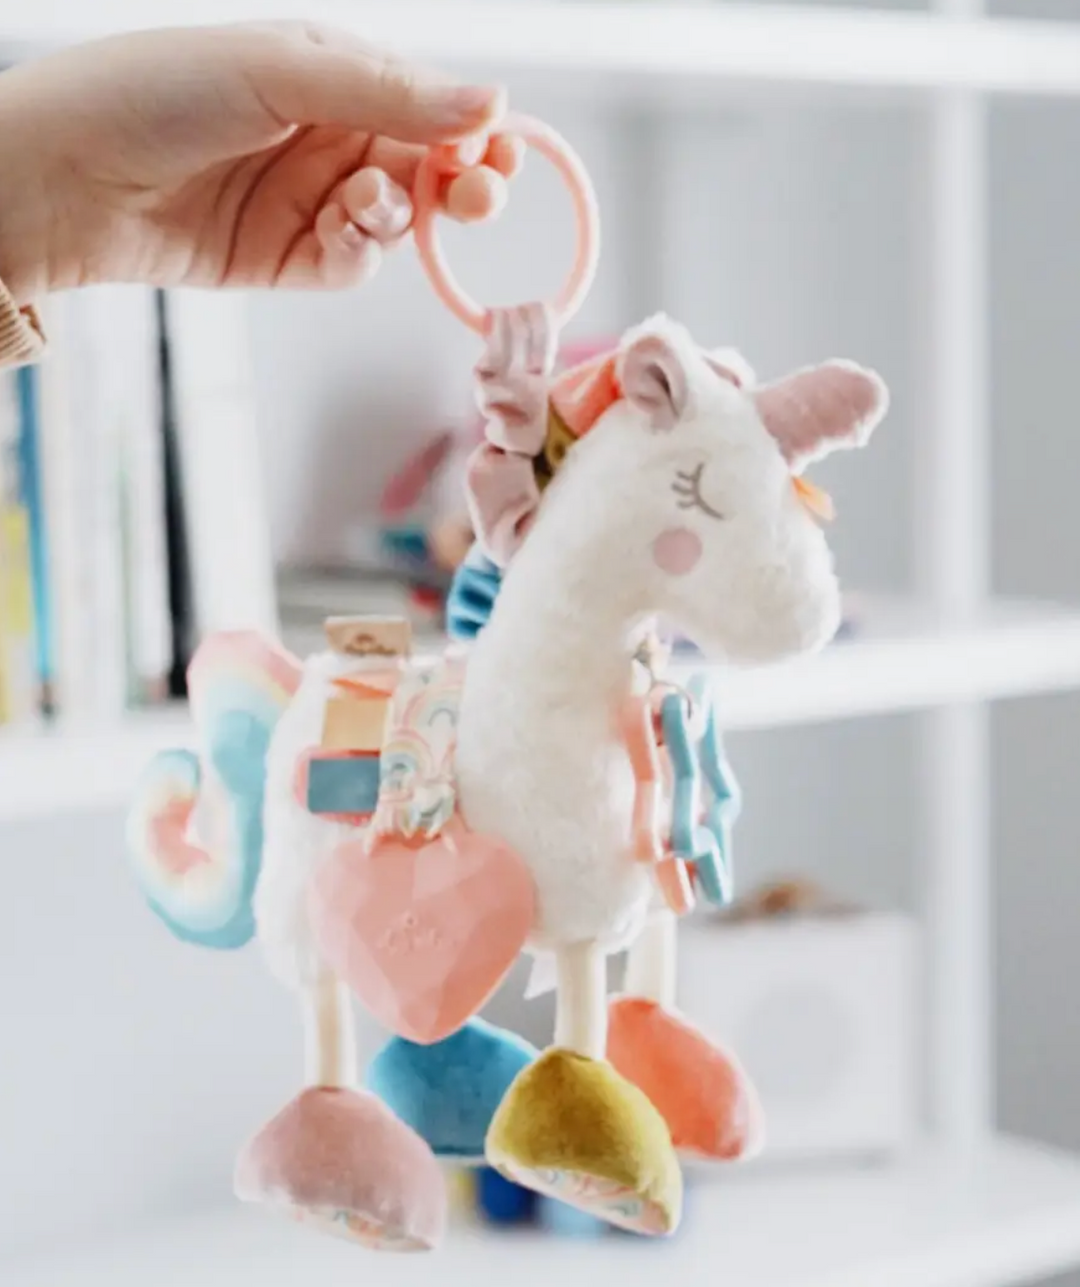 Itzy Friends Link & Love™ Unicorn Activity Plush with Teether Toy